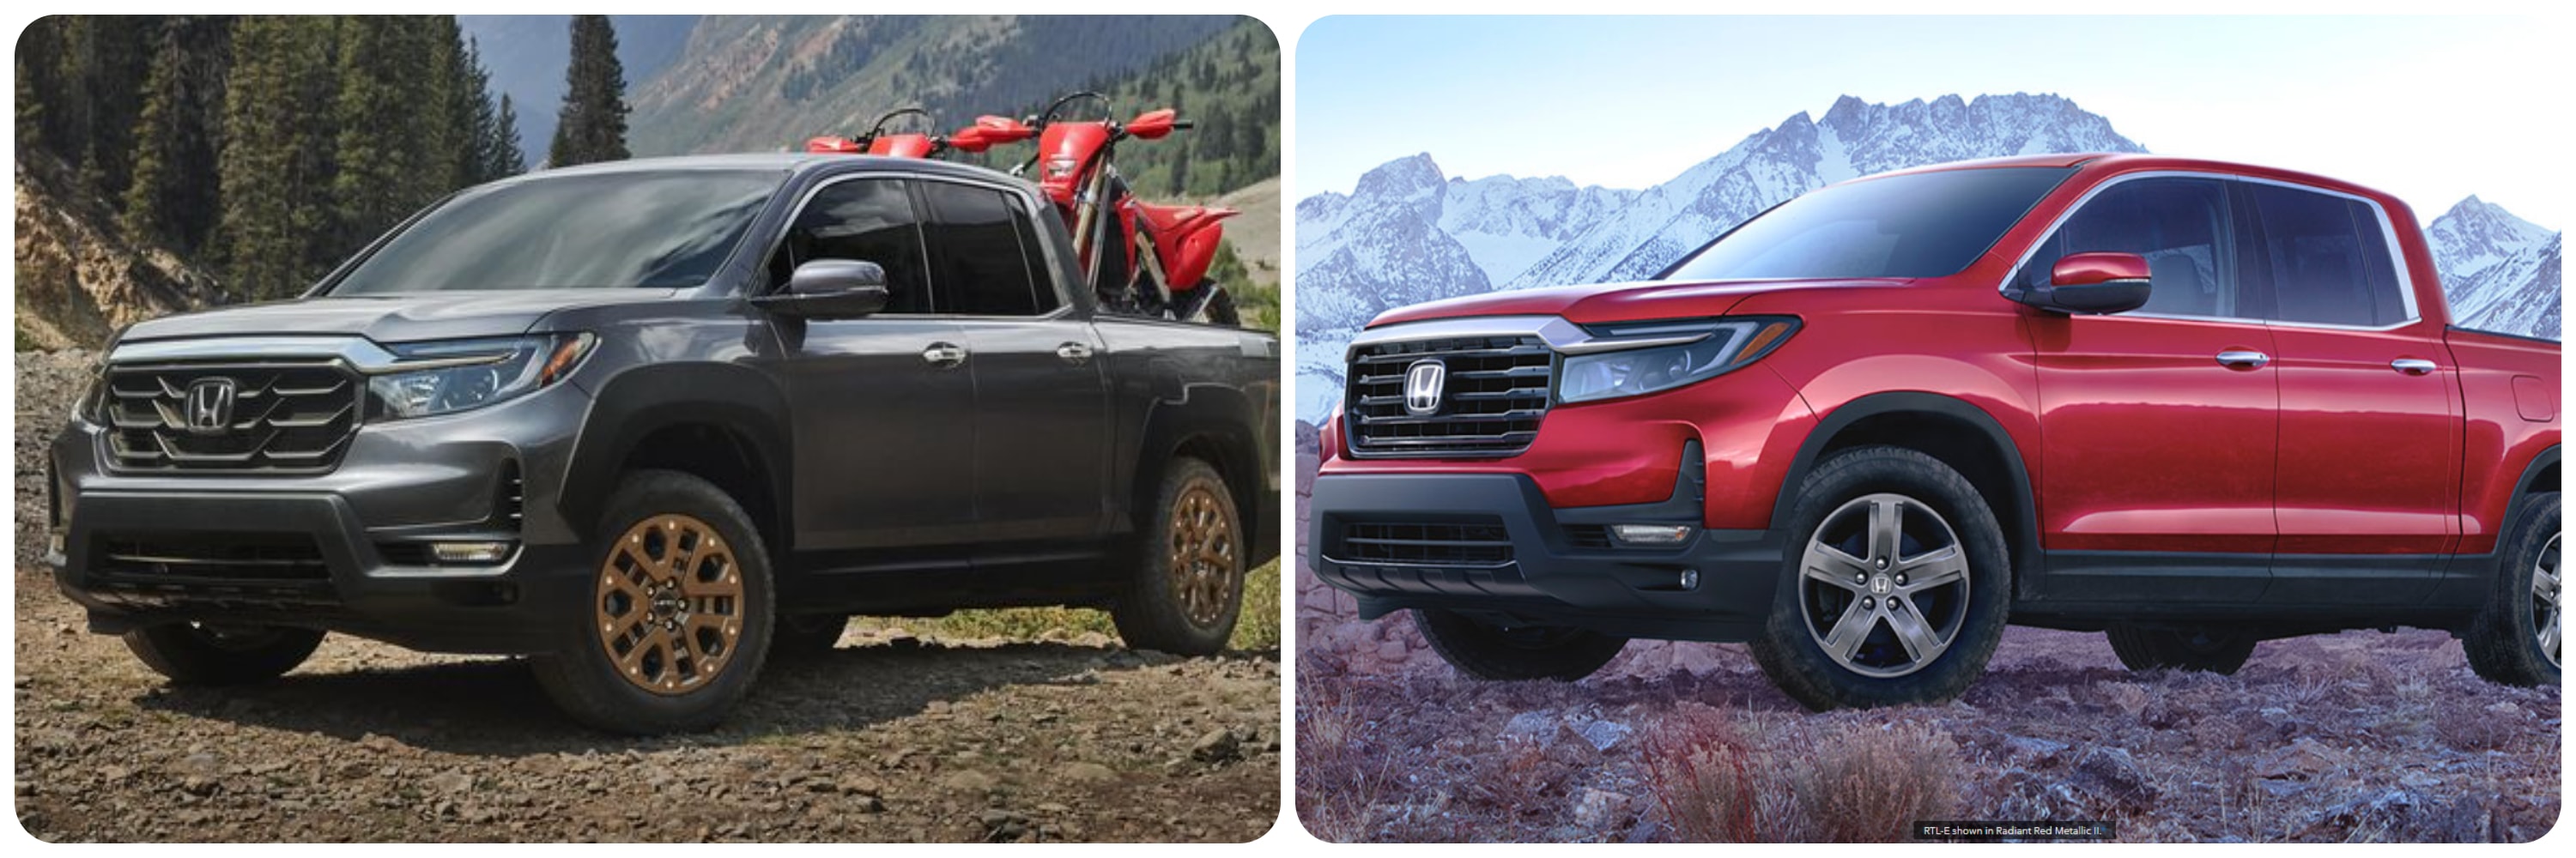 On the left, a gray 2021 Honda Ridgeline sits parked on a dirt road with four-wheelers loaded in the bed. On the right, a red 2022 Honda Ridgeline sits parked in a field with mountains in the background.